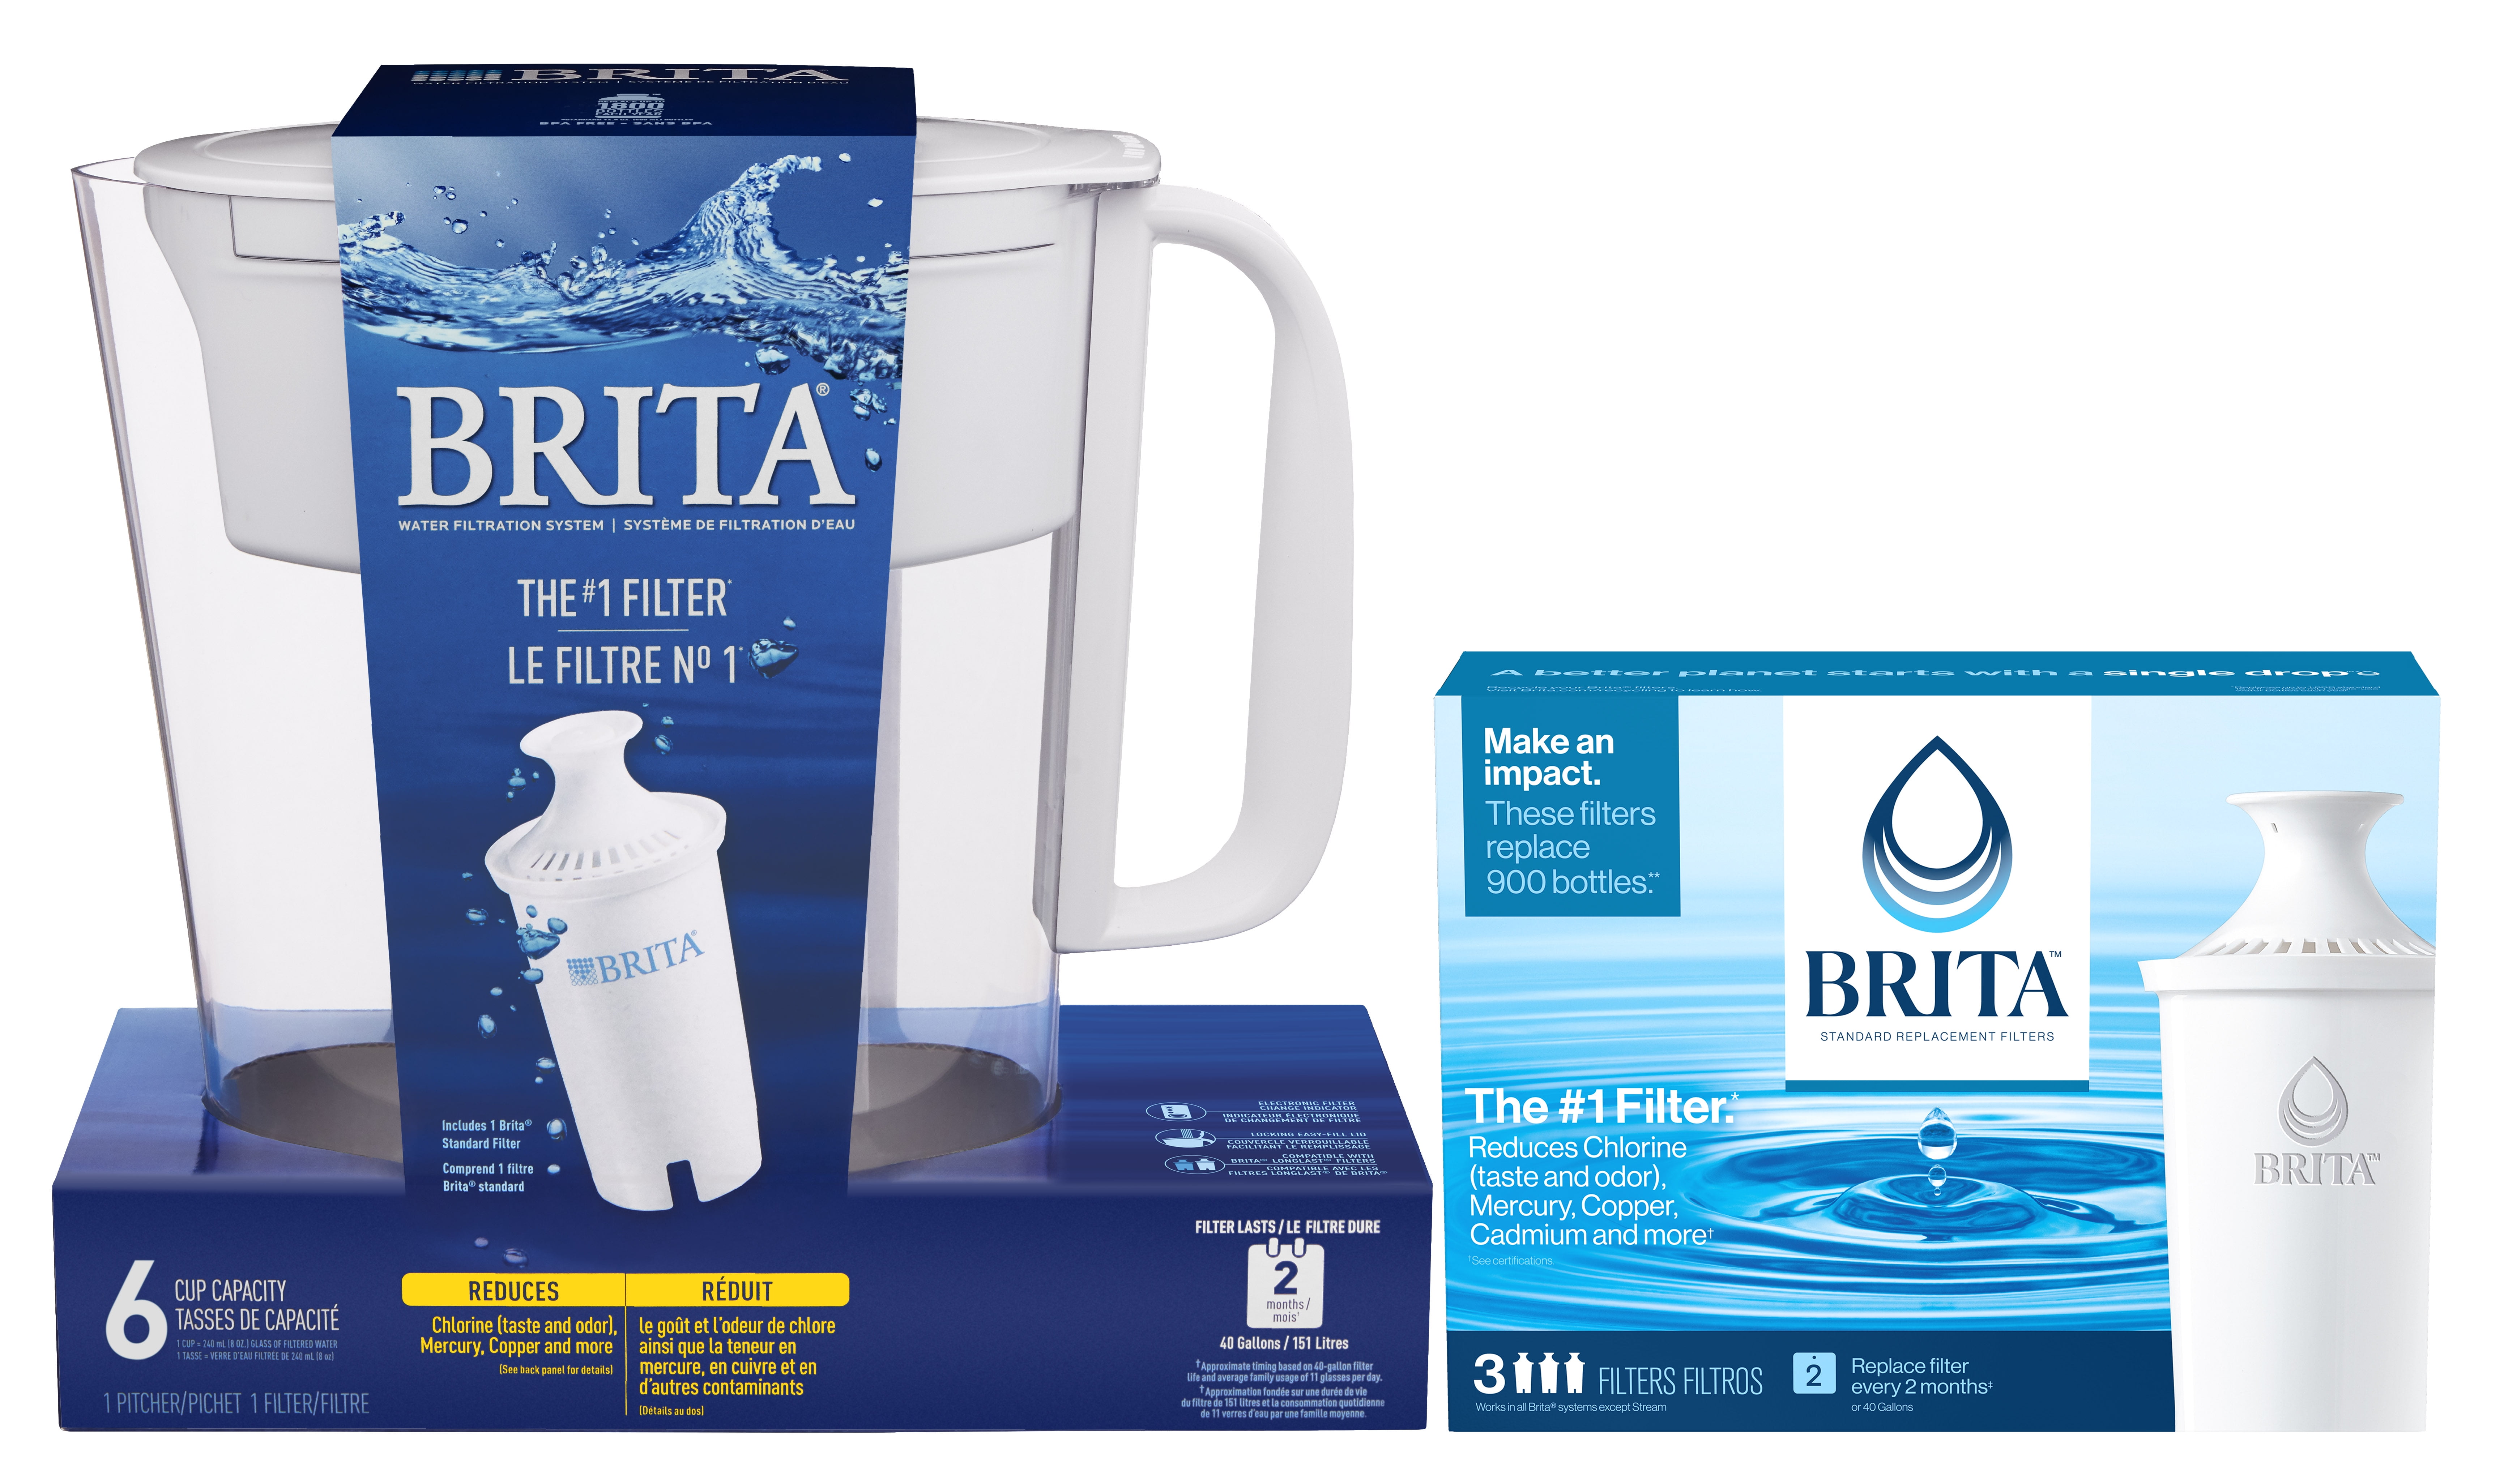 Brita Small Fiery Red 6 Cup Water Filter Pitcher with Standard